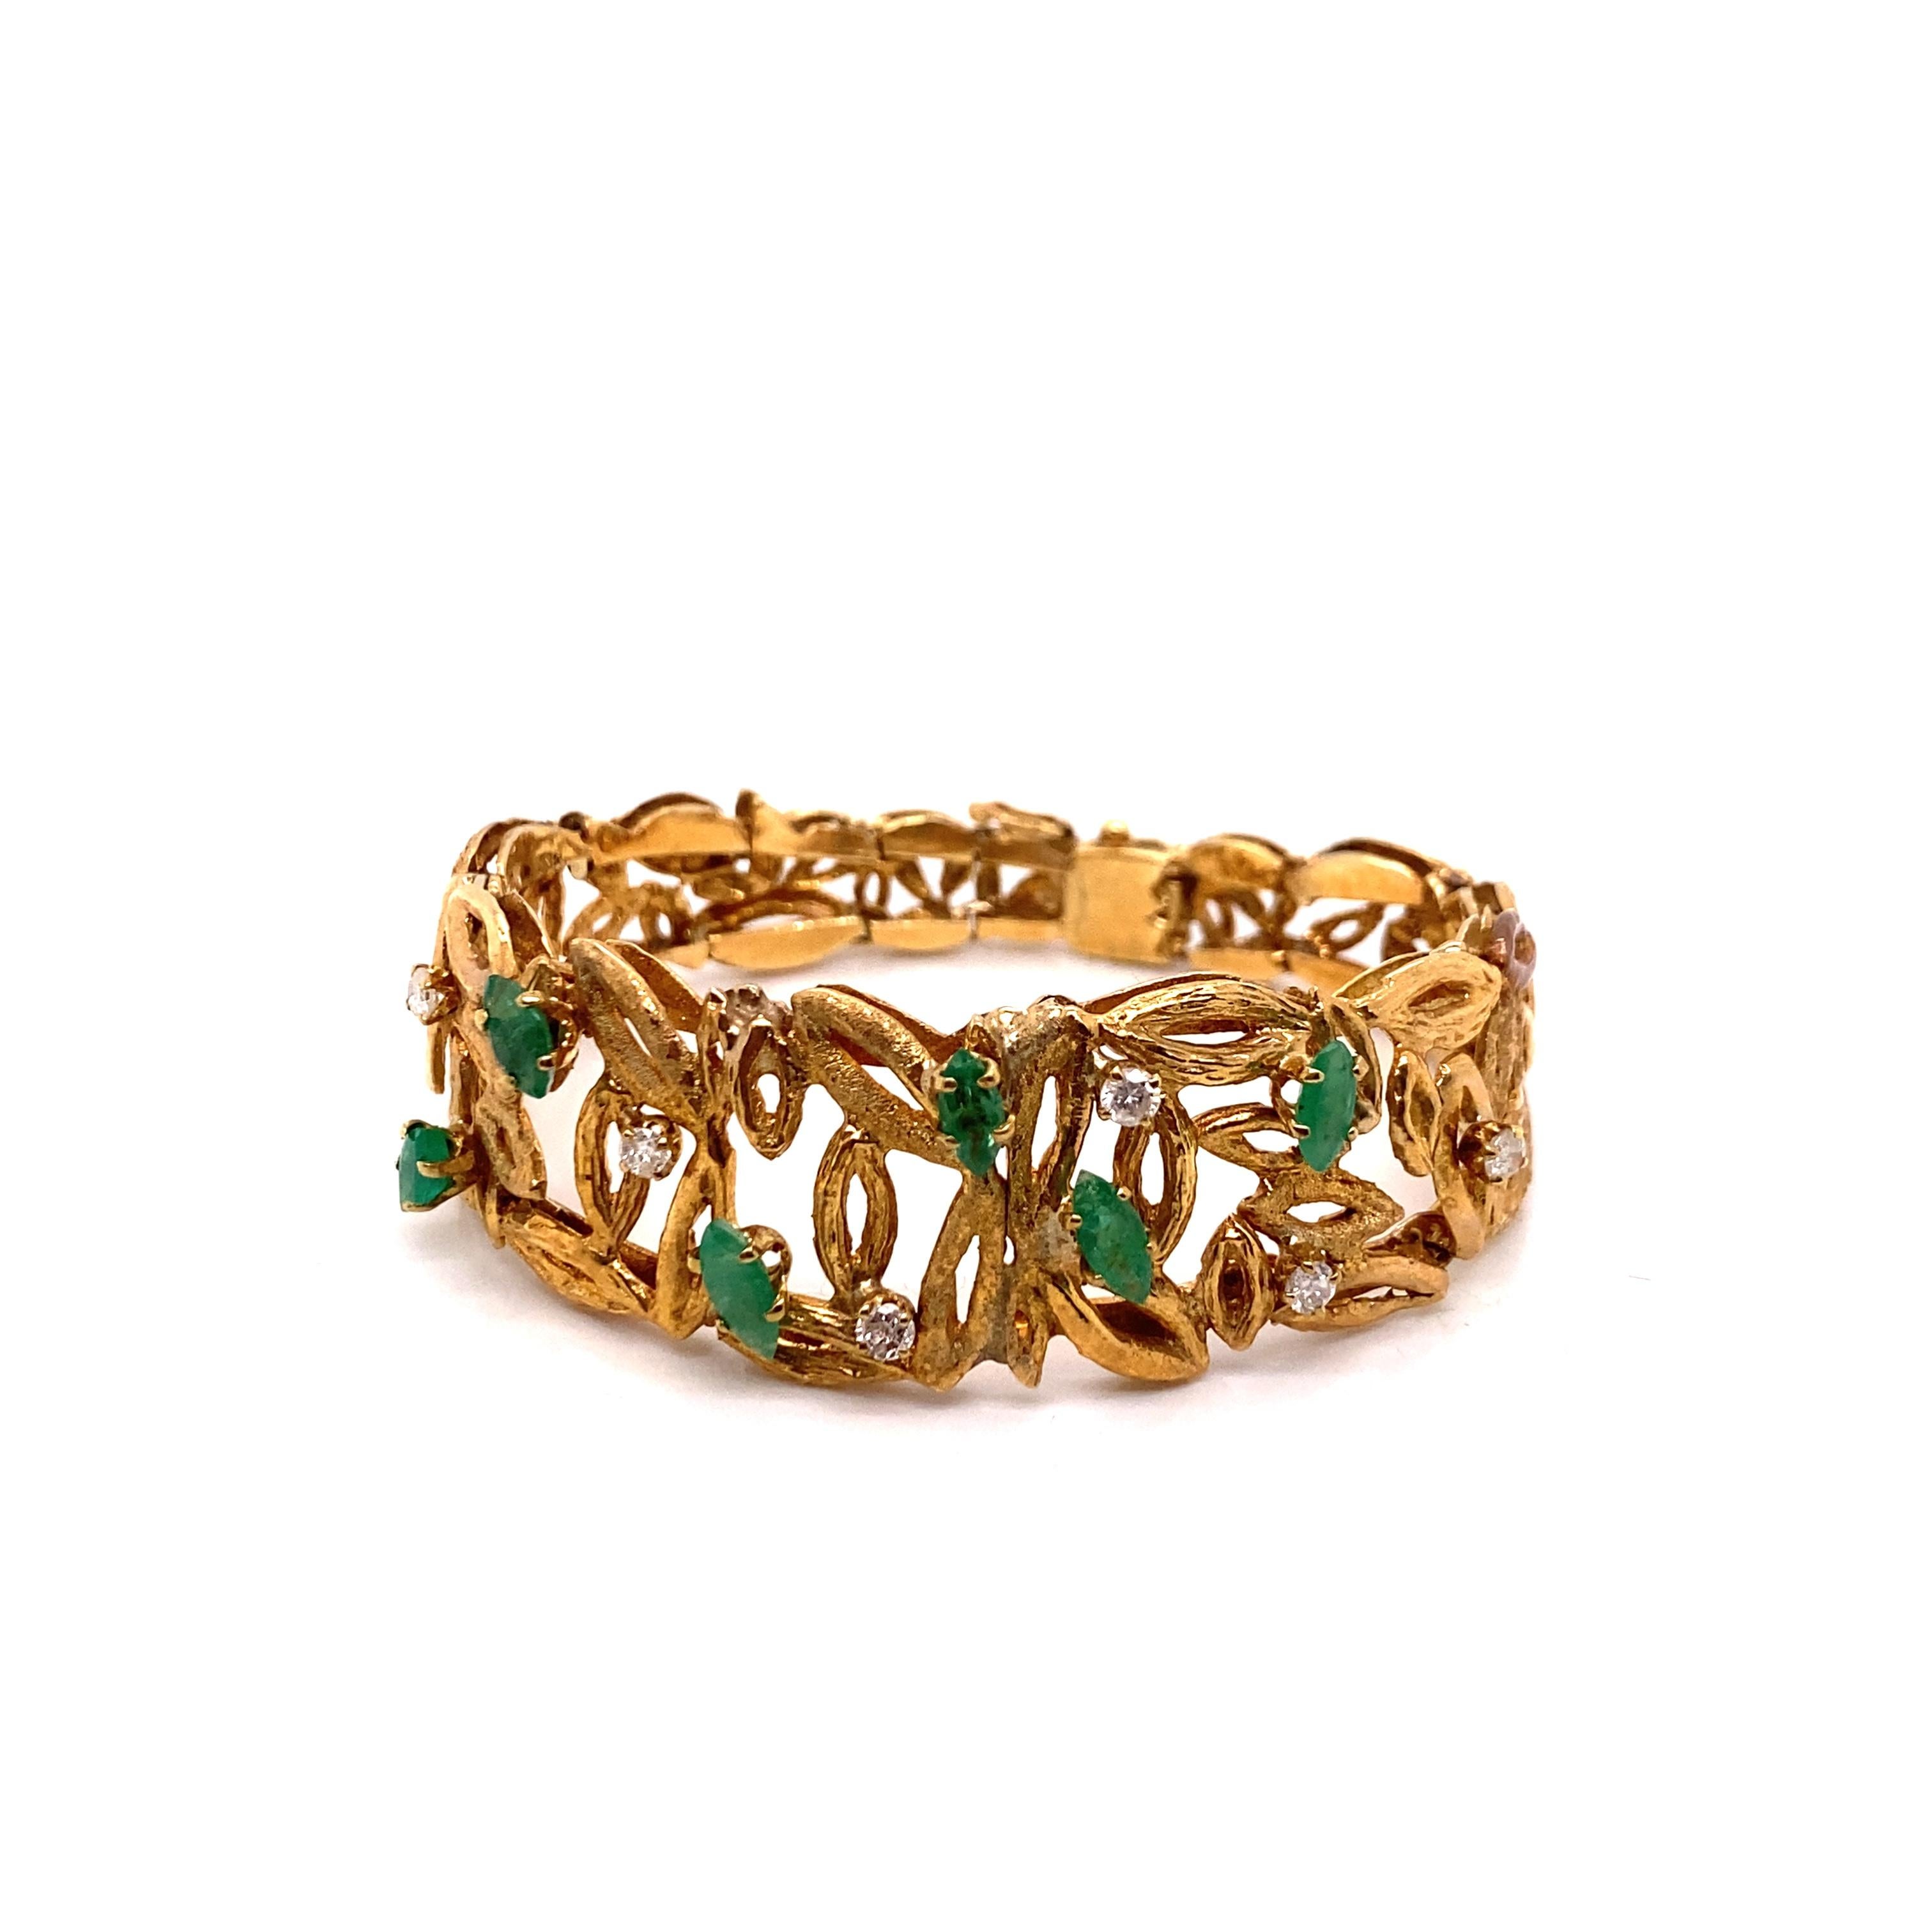 Vintage 1980's 14K Yellow Gold Bracelet with Emeralds and Diamonds - The bracelet contains 6 marquise emeralds and 6 round diamonds. The emeralds range in measurement from 6 x3mm to 8 x 3.5mm. The diamonds weigh approximately .50ct with G - H color